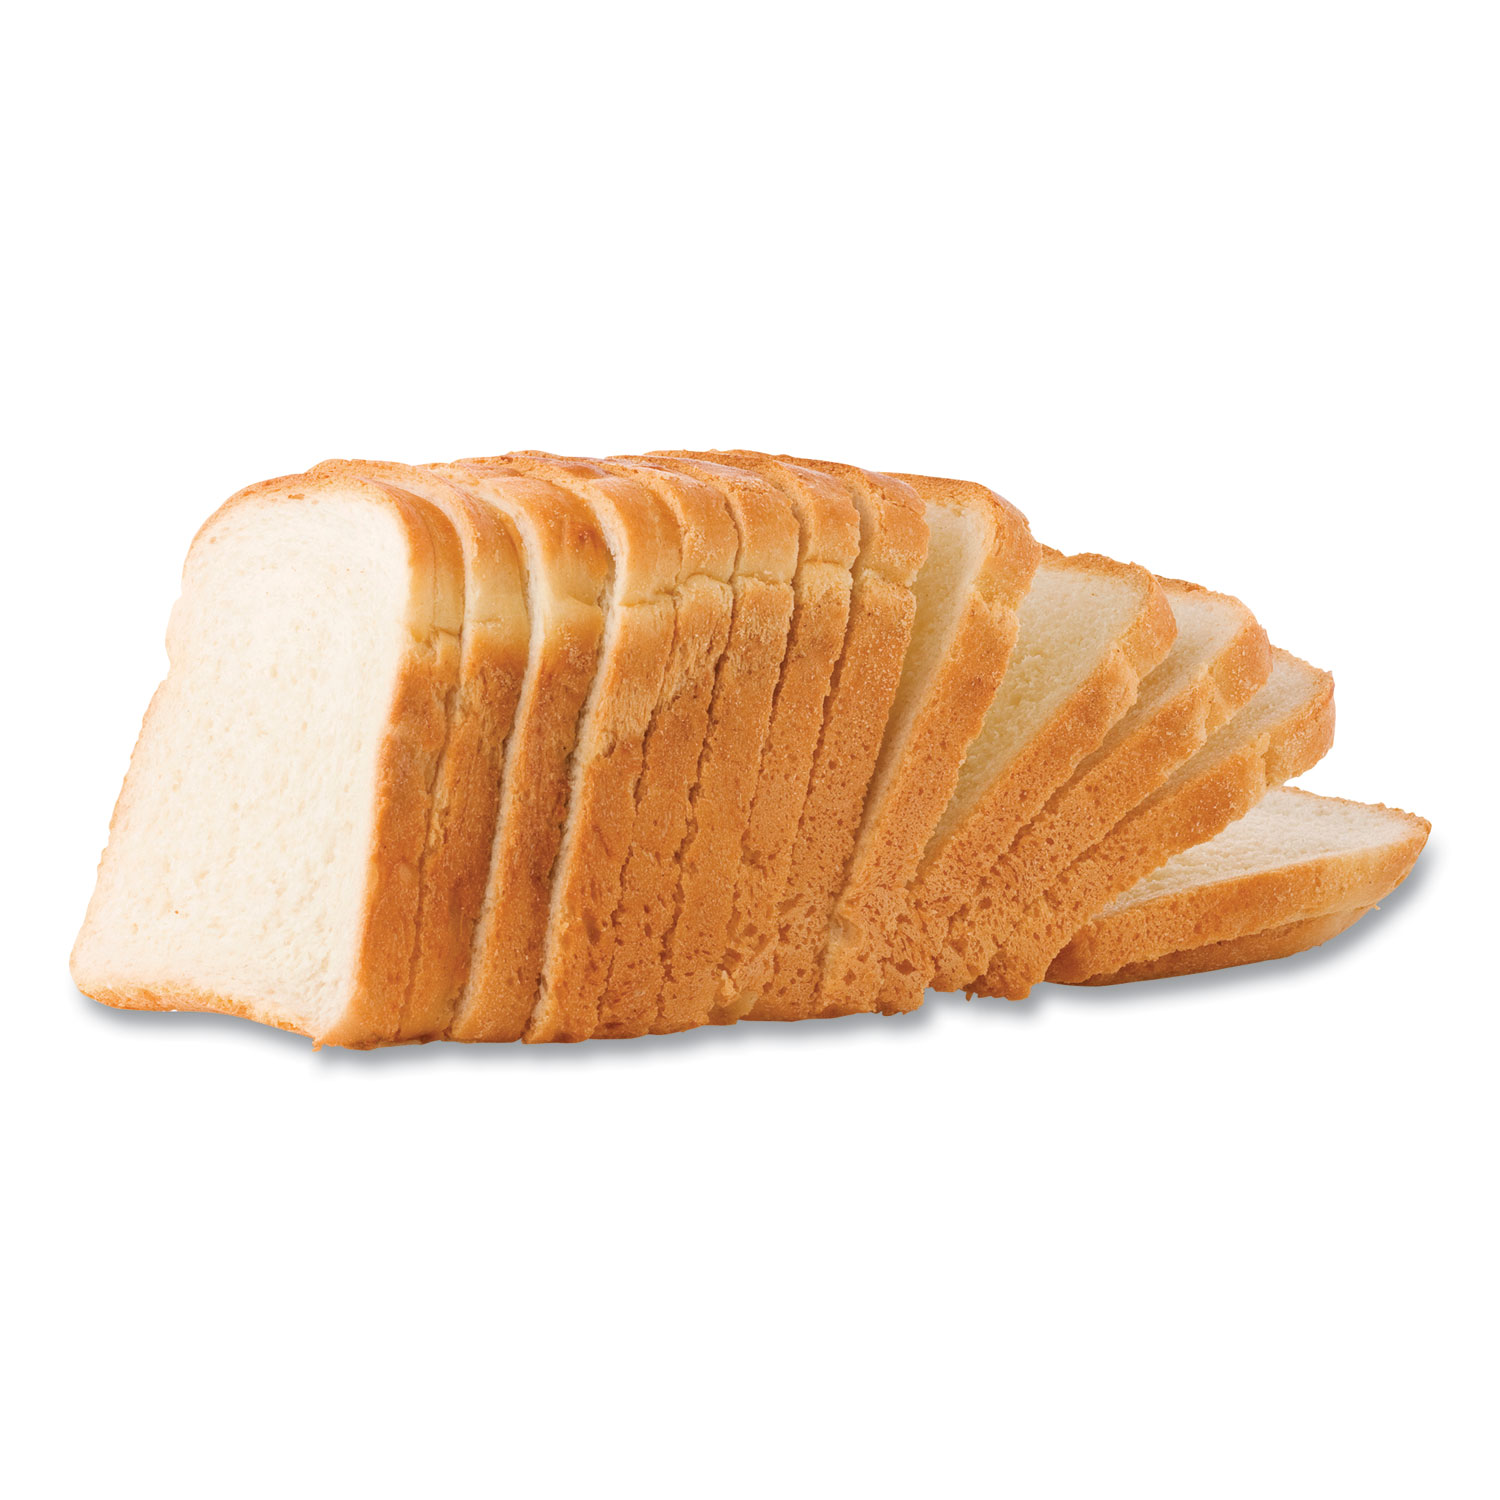  National Brand 987560 White Bread, 2/Pack, Free Delivery in 1-4 Business Days (GRR90000010) 